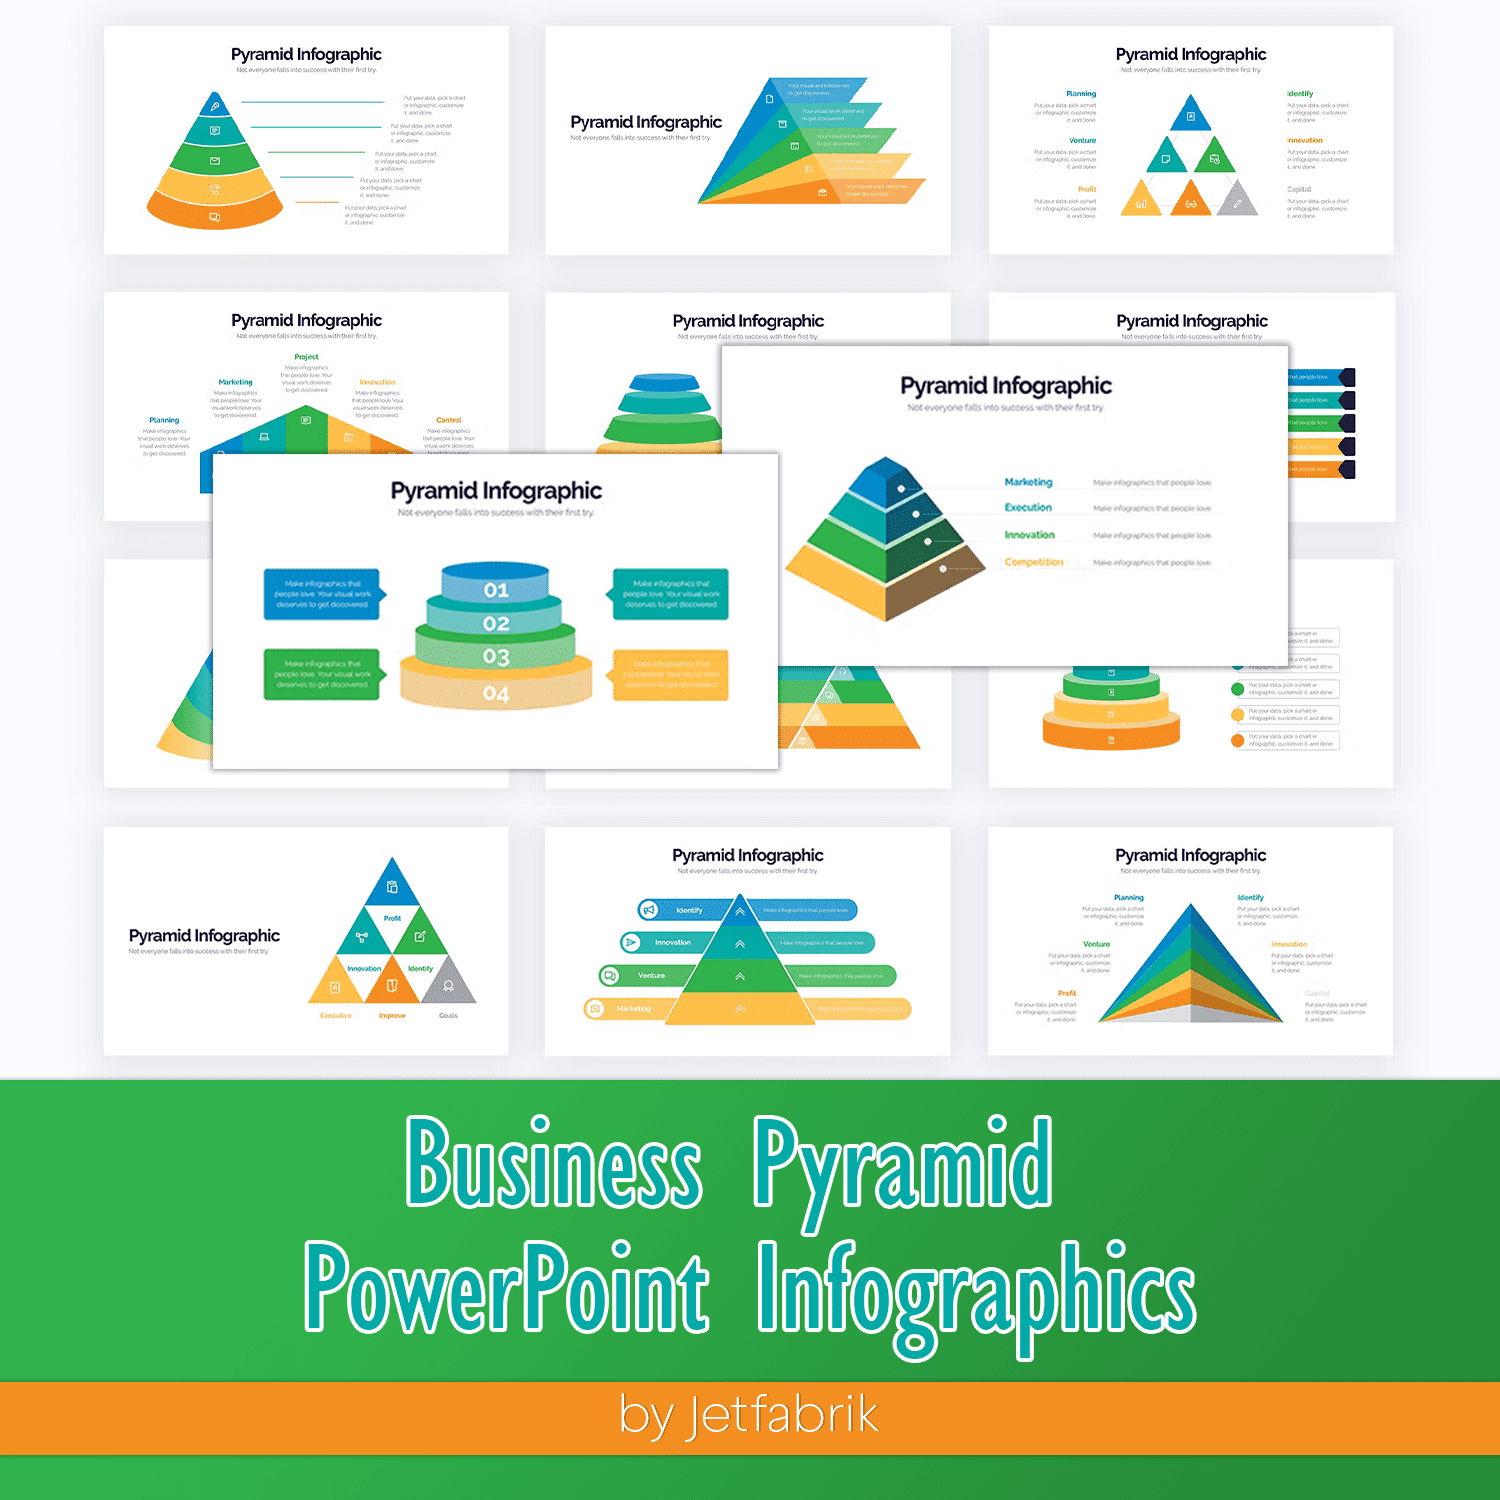 Business Pyramid PowerPoint Infographics Cover.